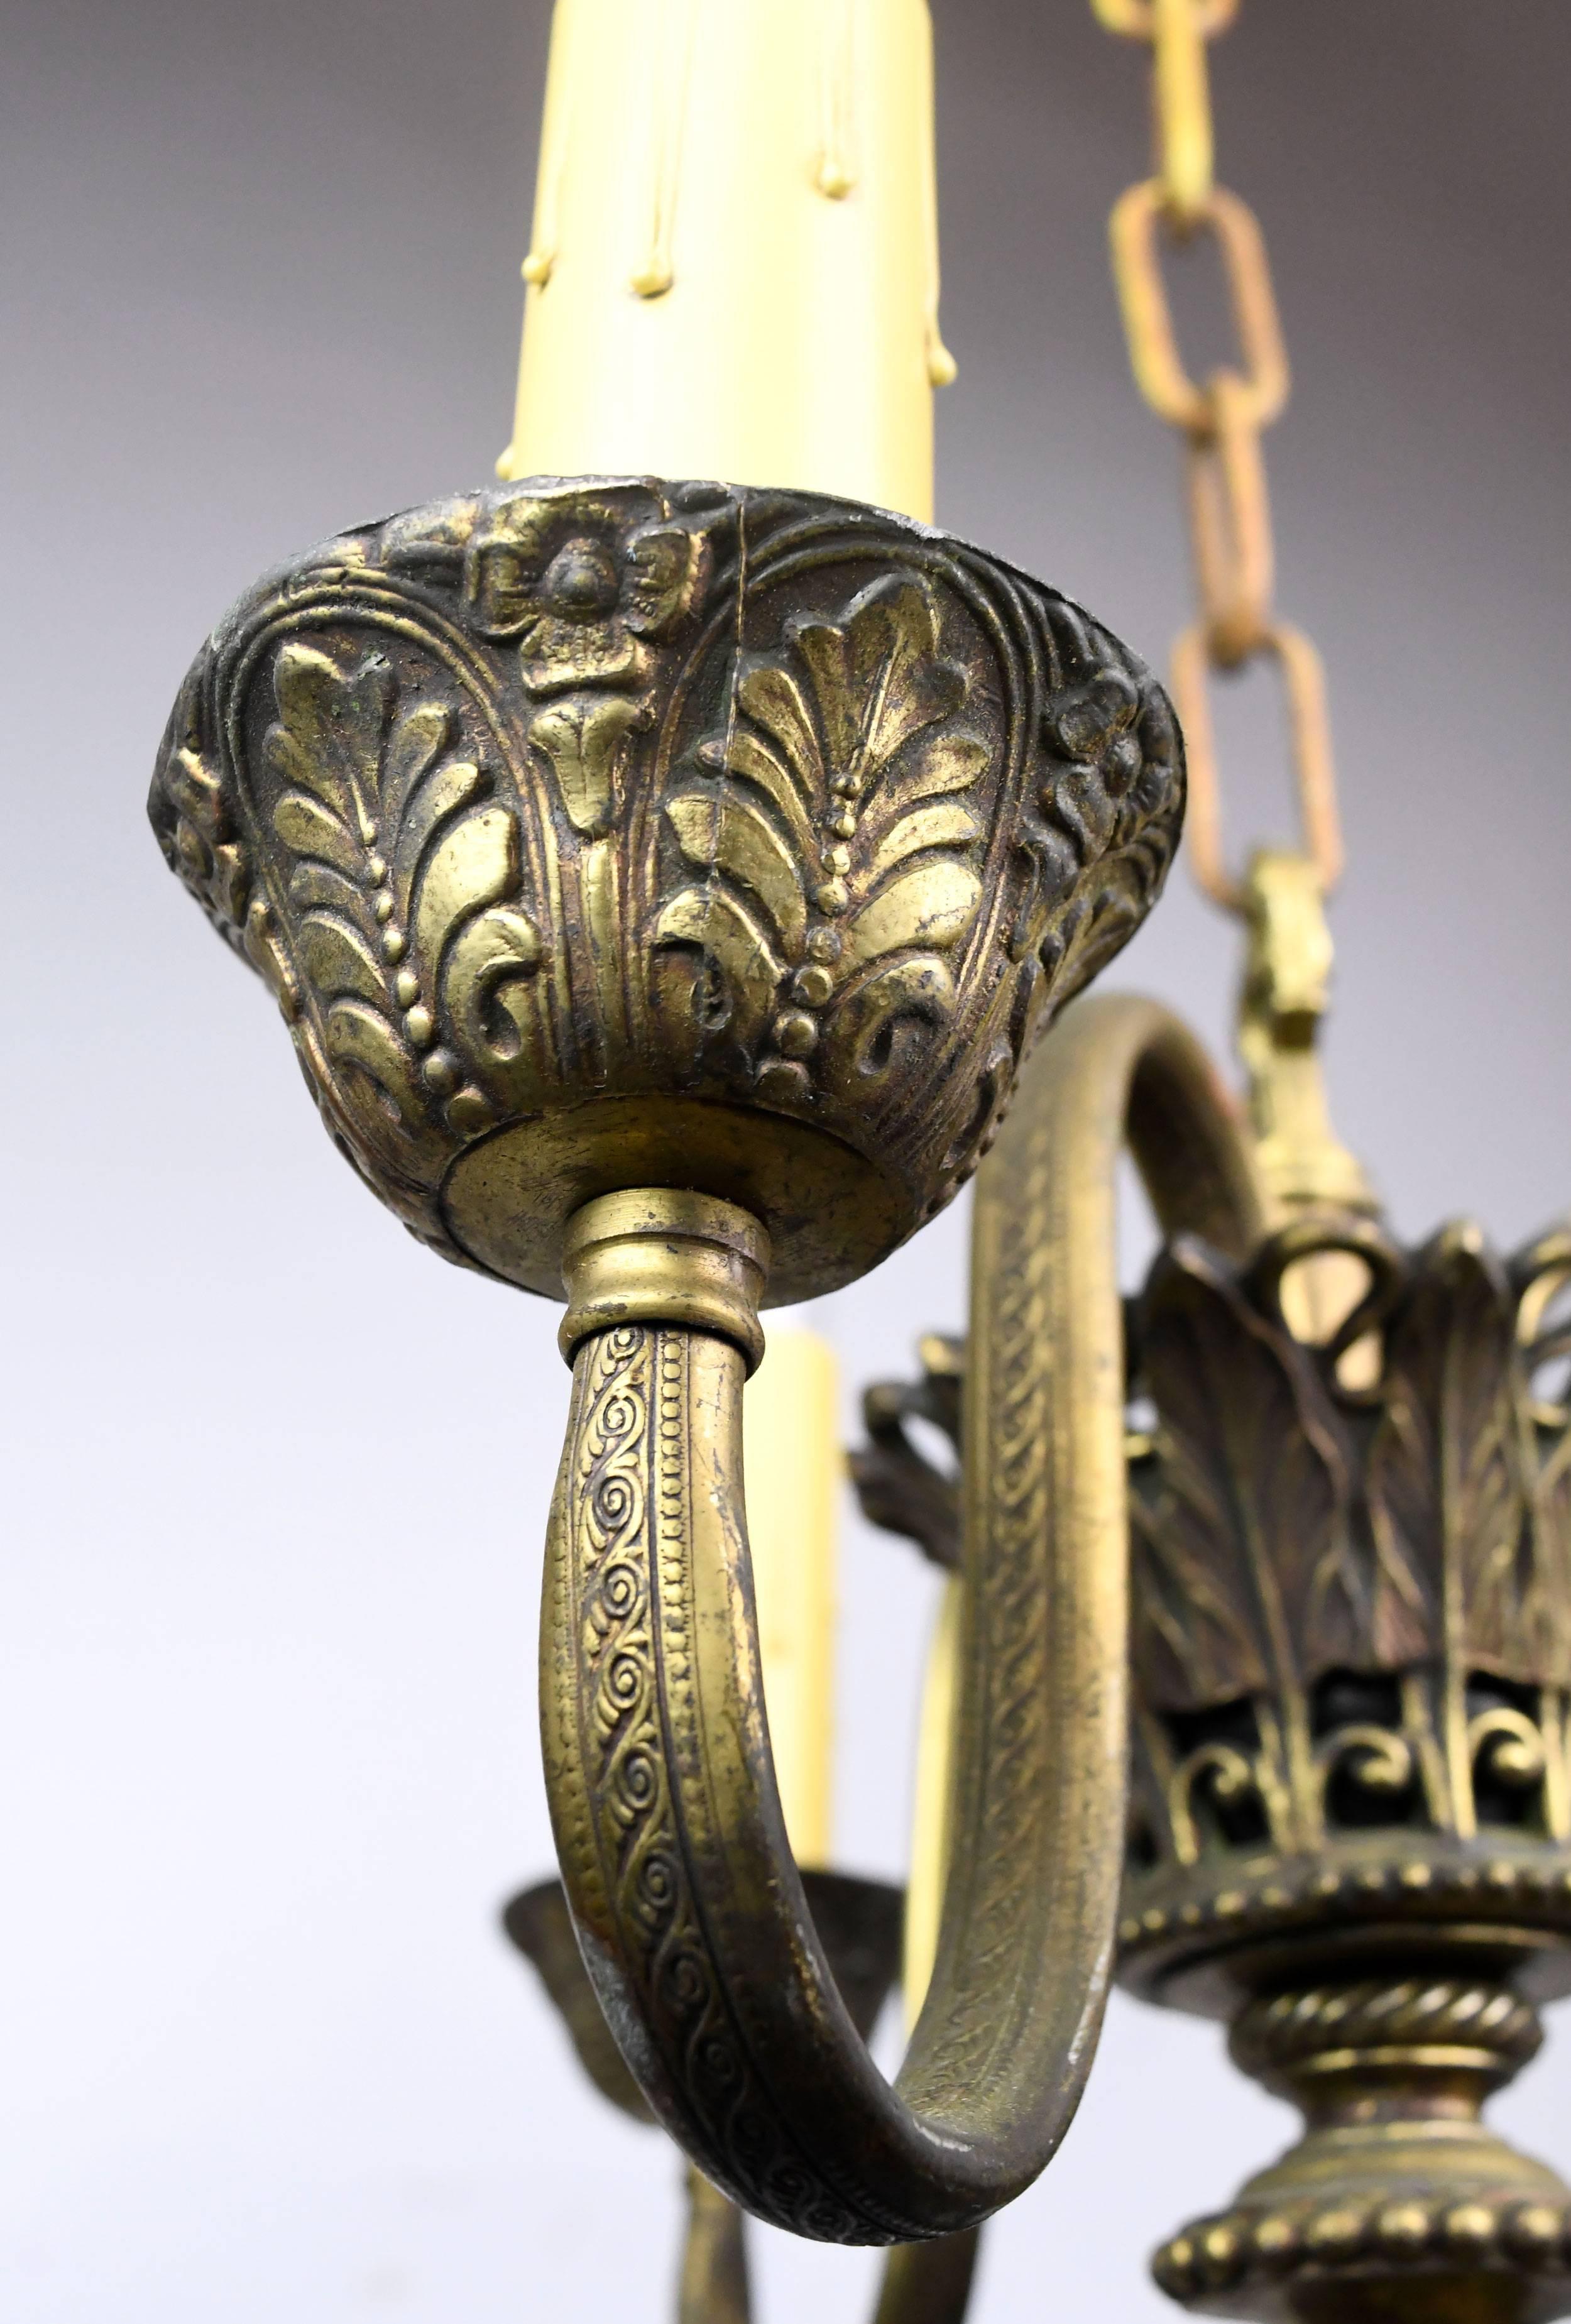 This gorgeous three-candle chandelier is composed of a mixture of cast brass and lead, giving the fixture considerable heft for its size. Sweeping arms are decorated with intricate patterns on top and bottom, and an ornate, oversized finial adds a